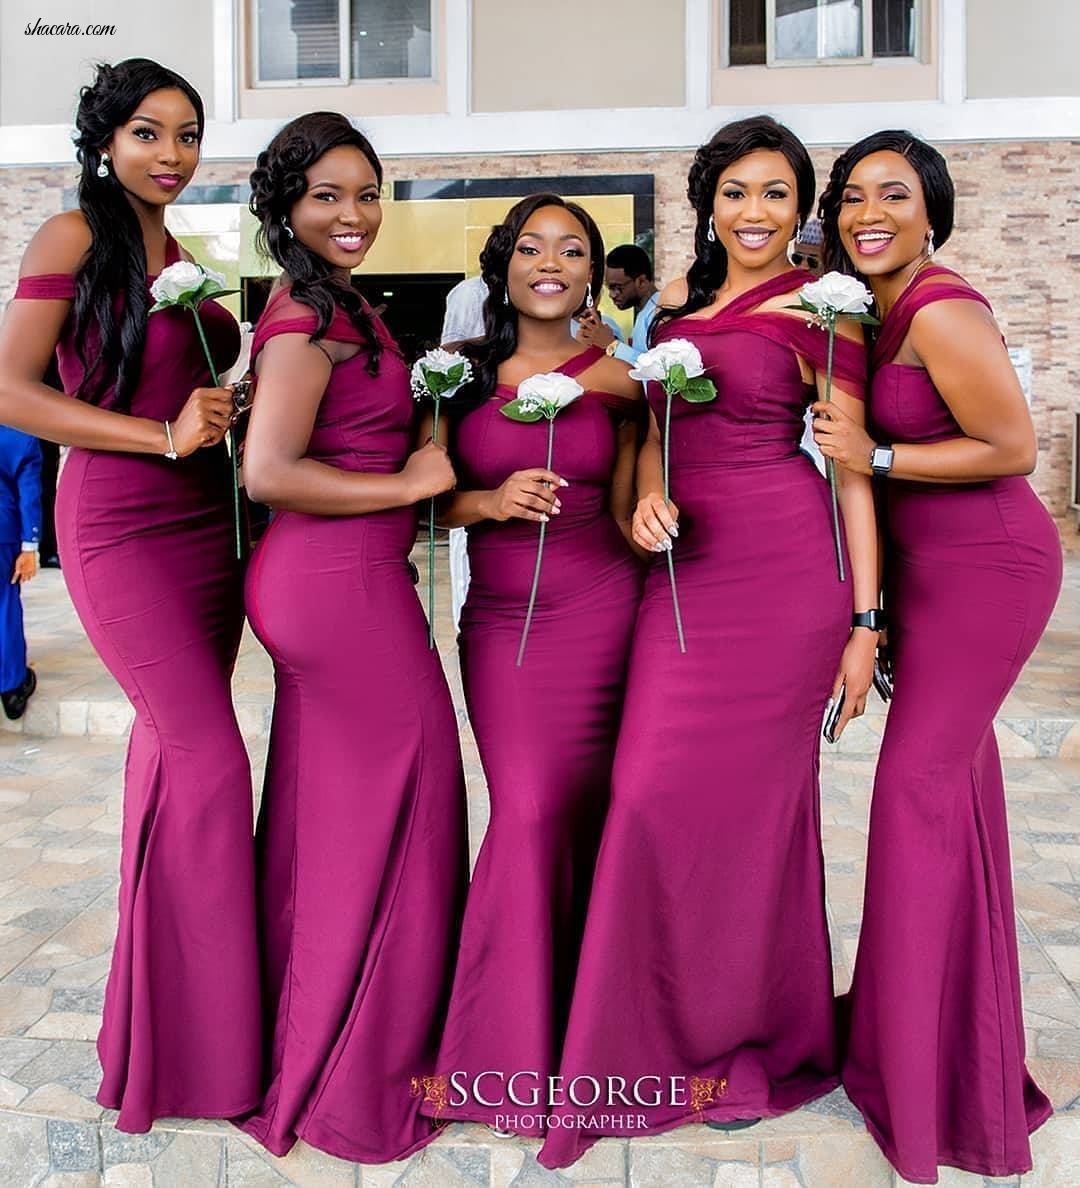 THE FABULOUS BRIDESMAID DRESSES WE ARE CRUSHING ON THIS WEEK